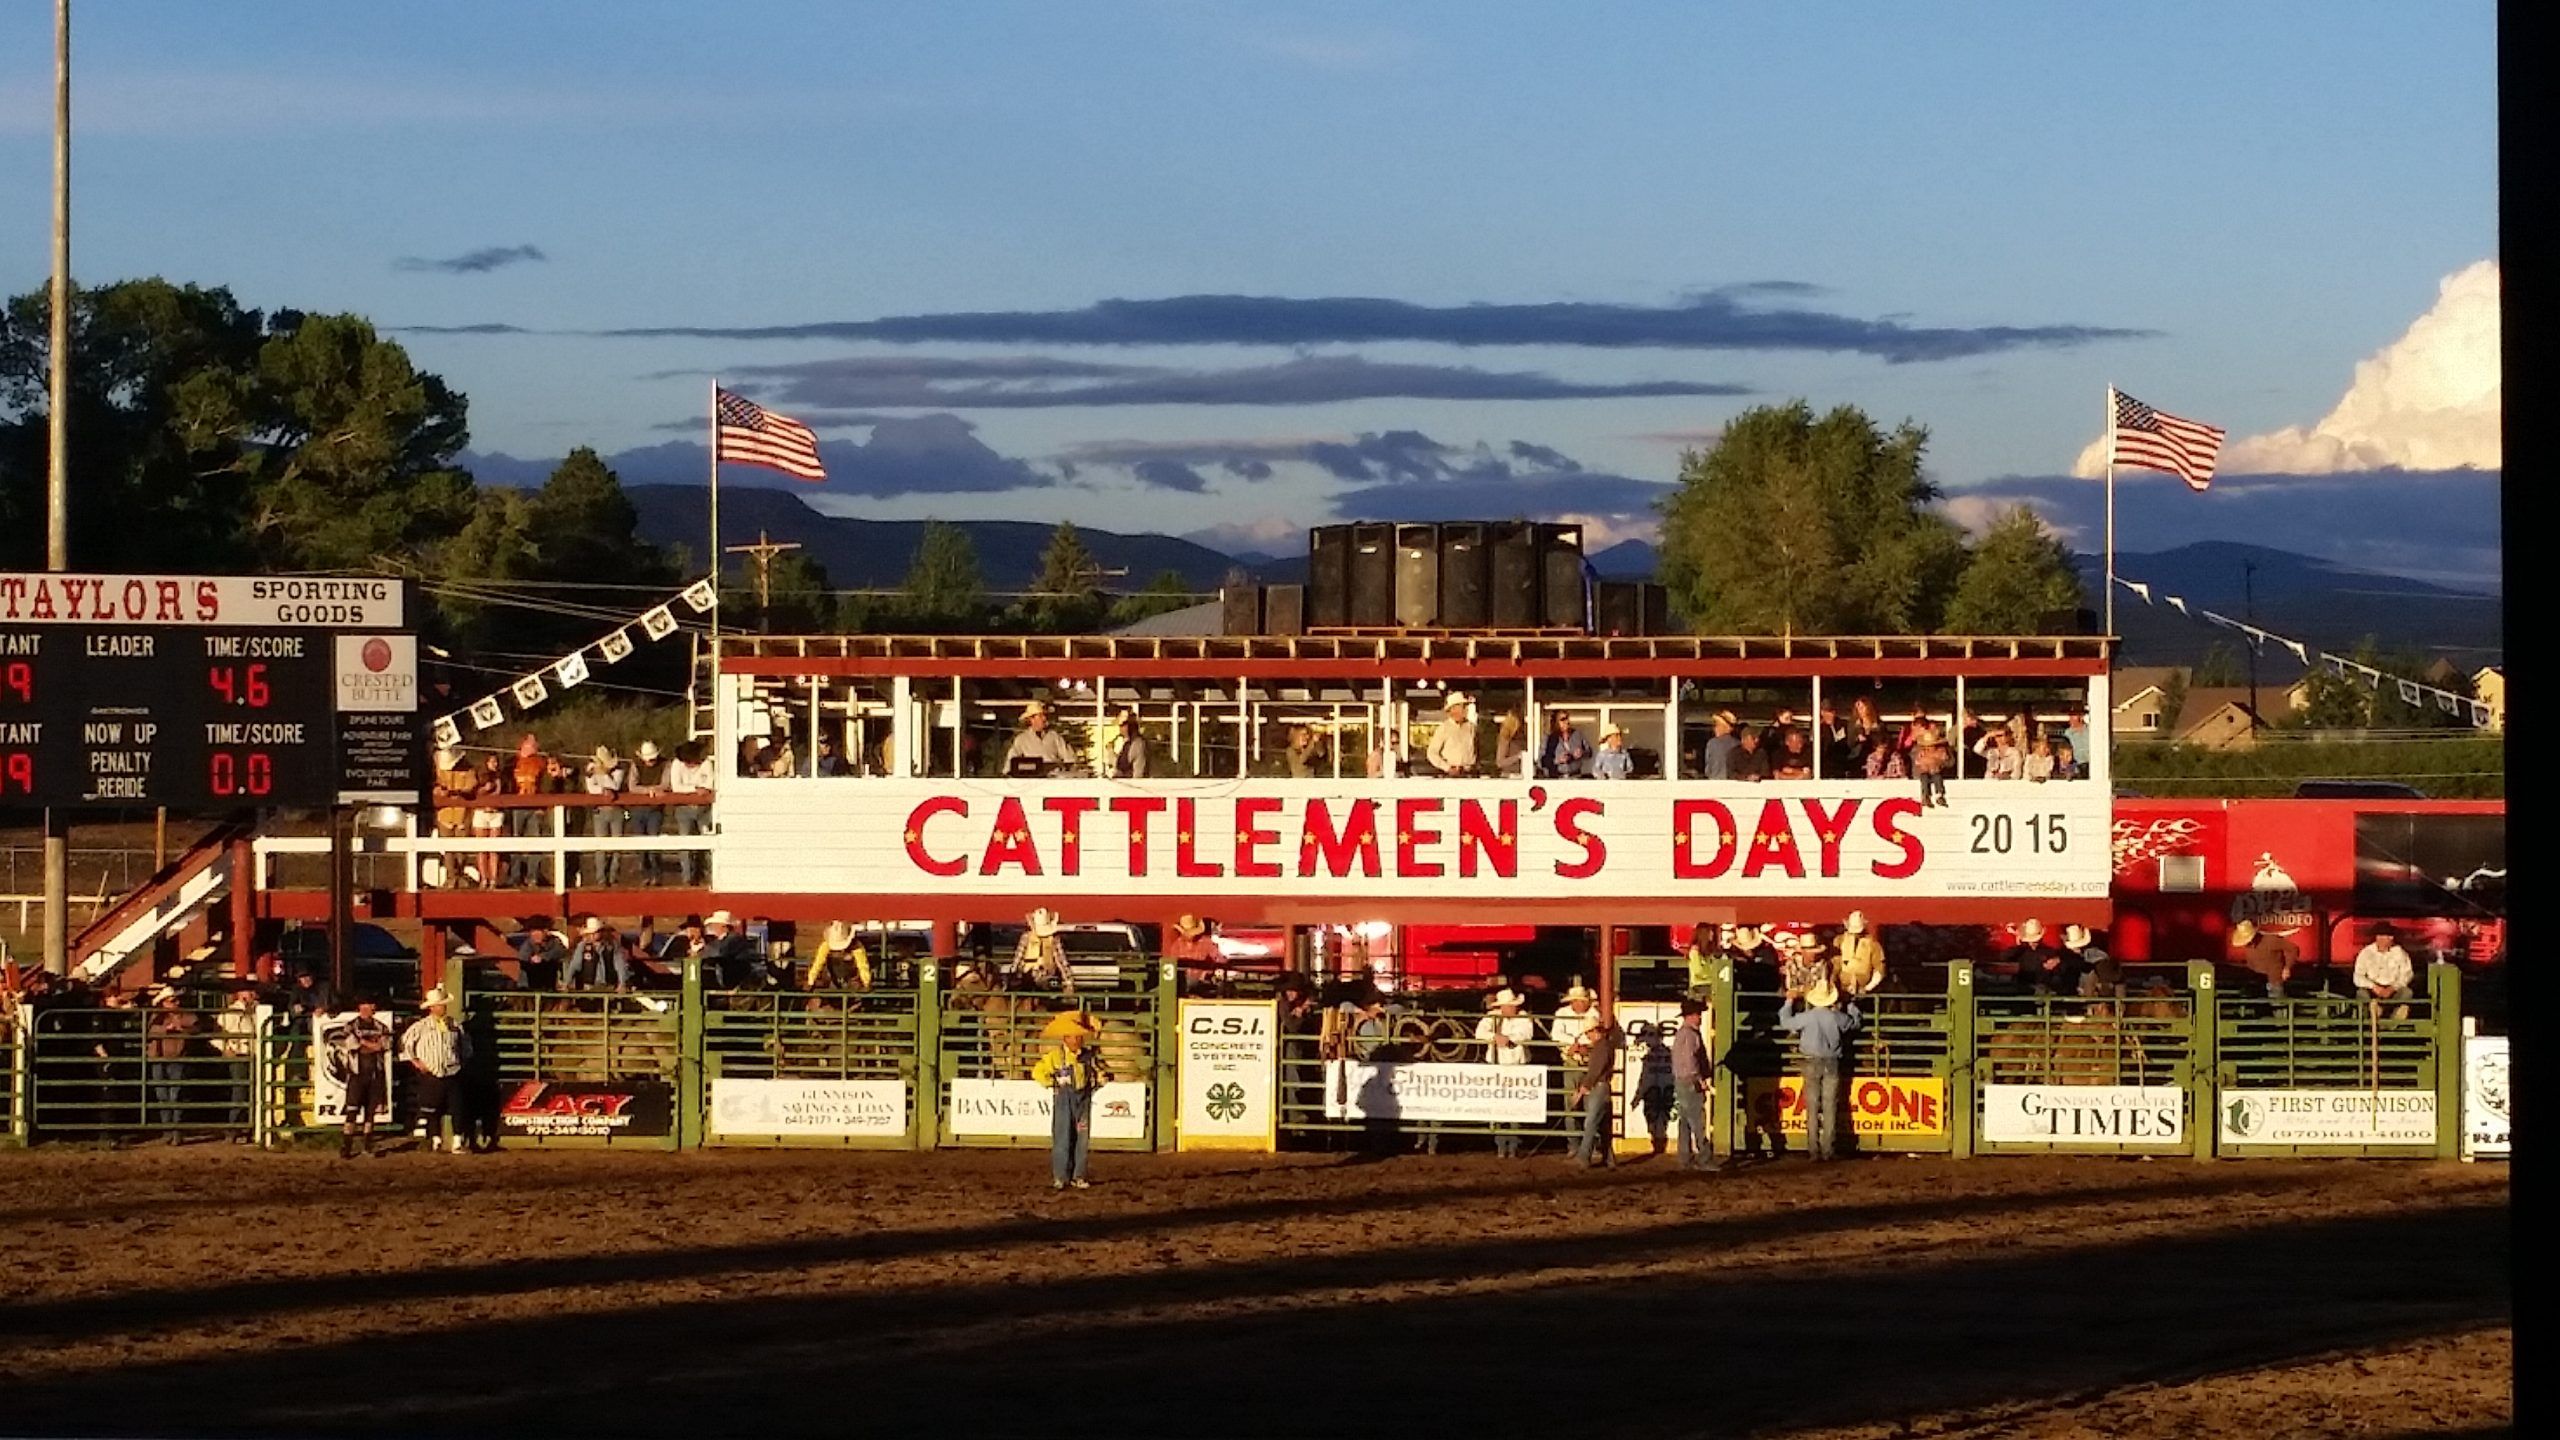 Cattlemen's Days is the fourth oldest pro rodeo in the US. It is held in Gunnison, Colorado.